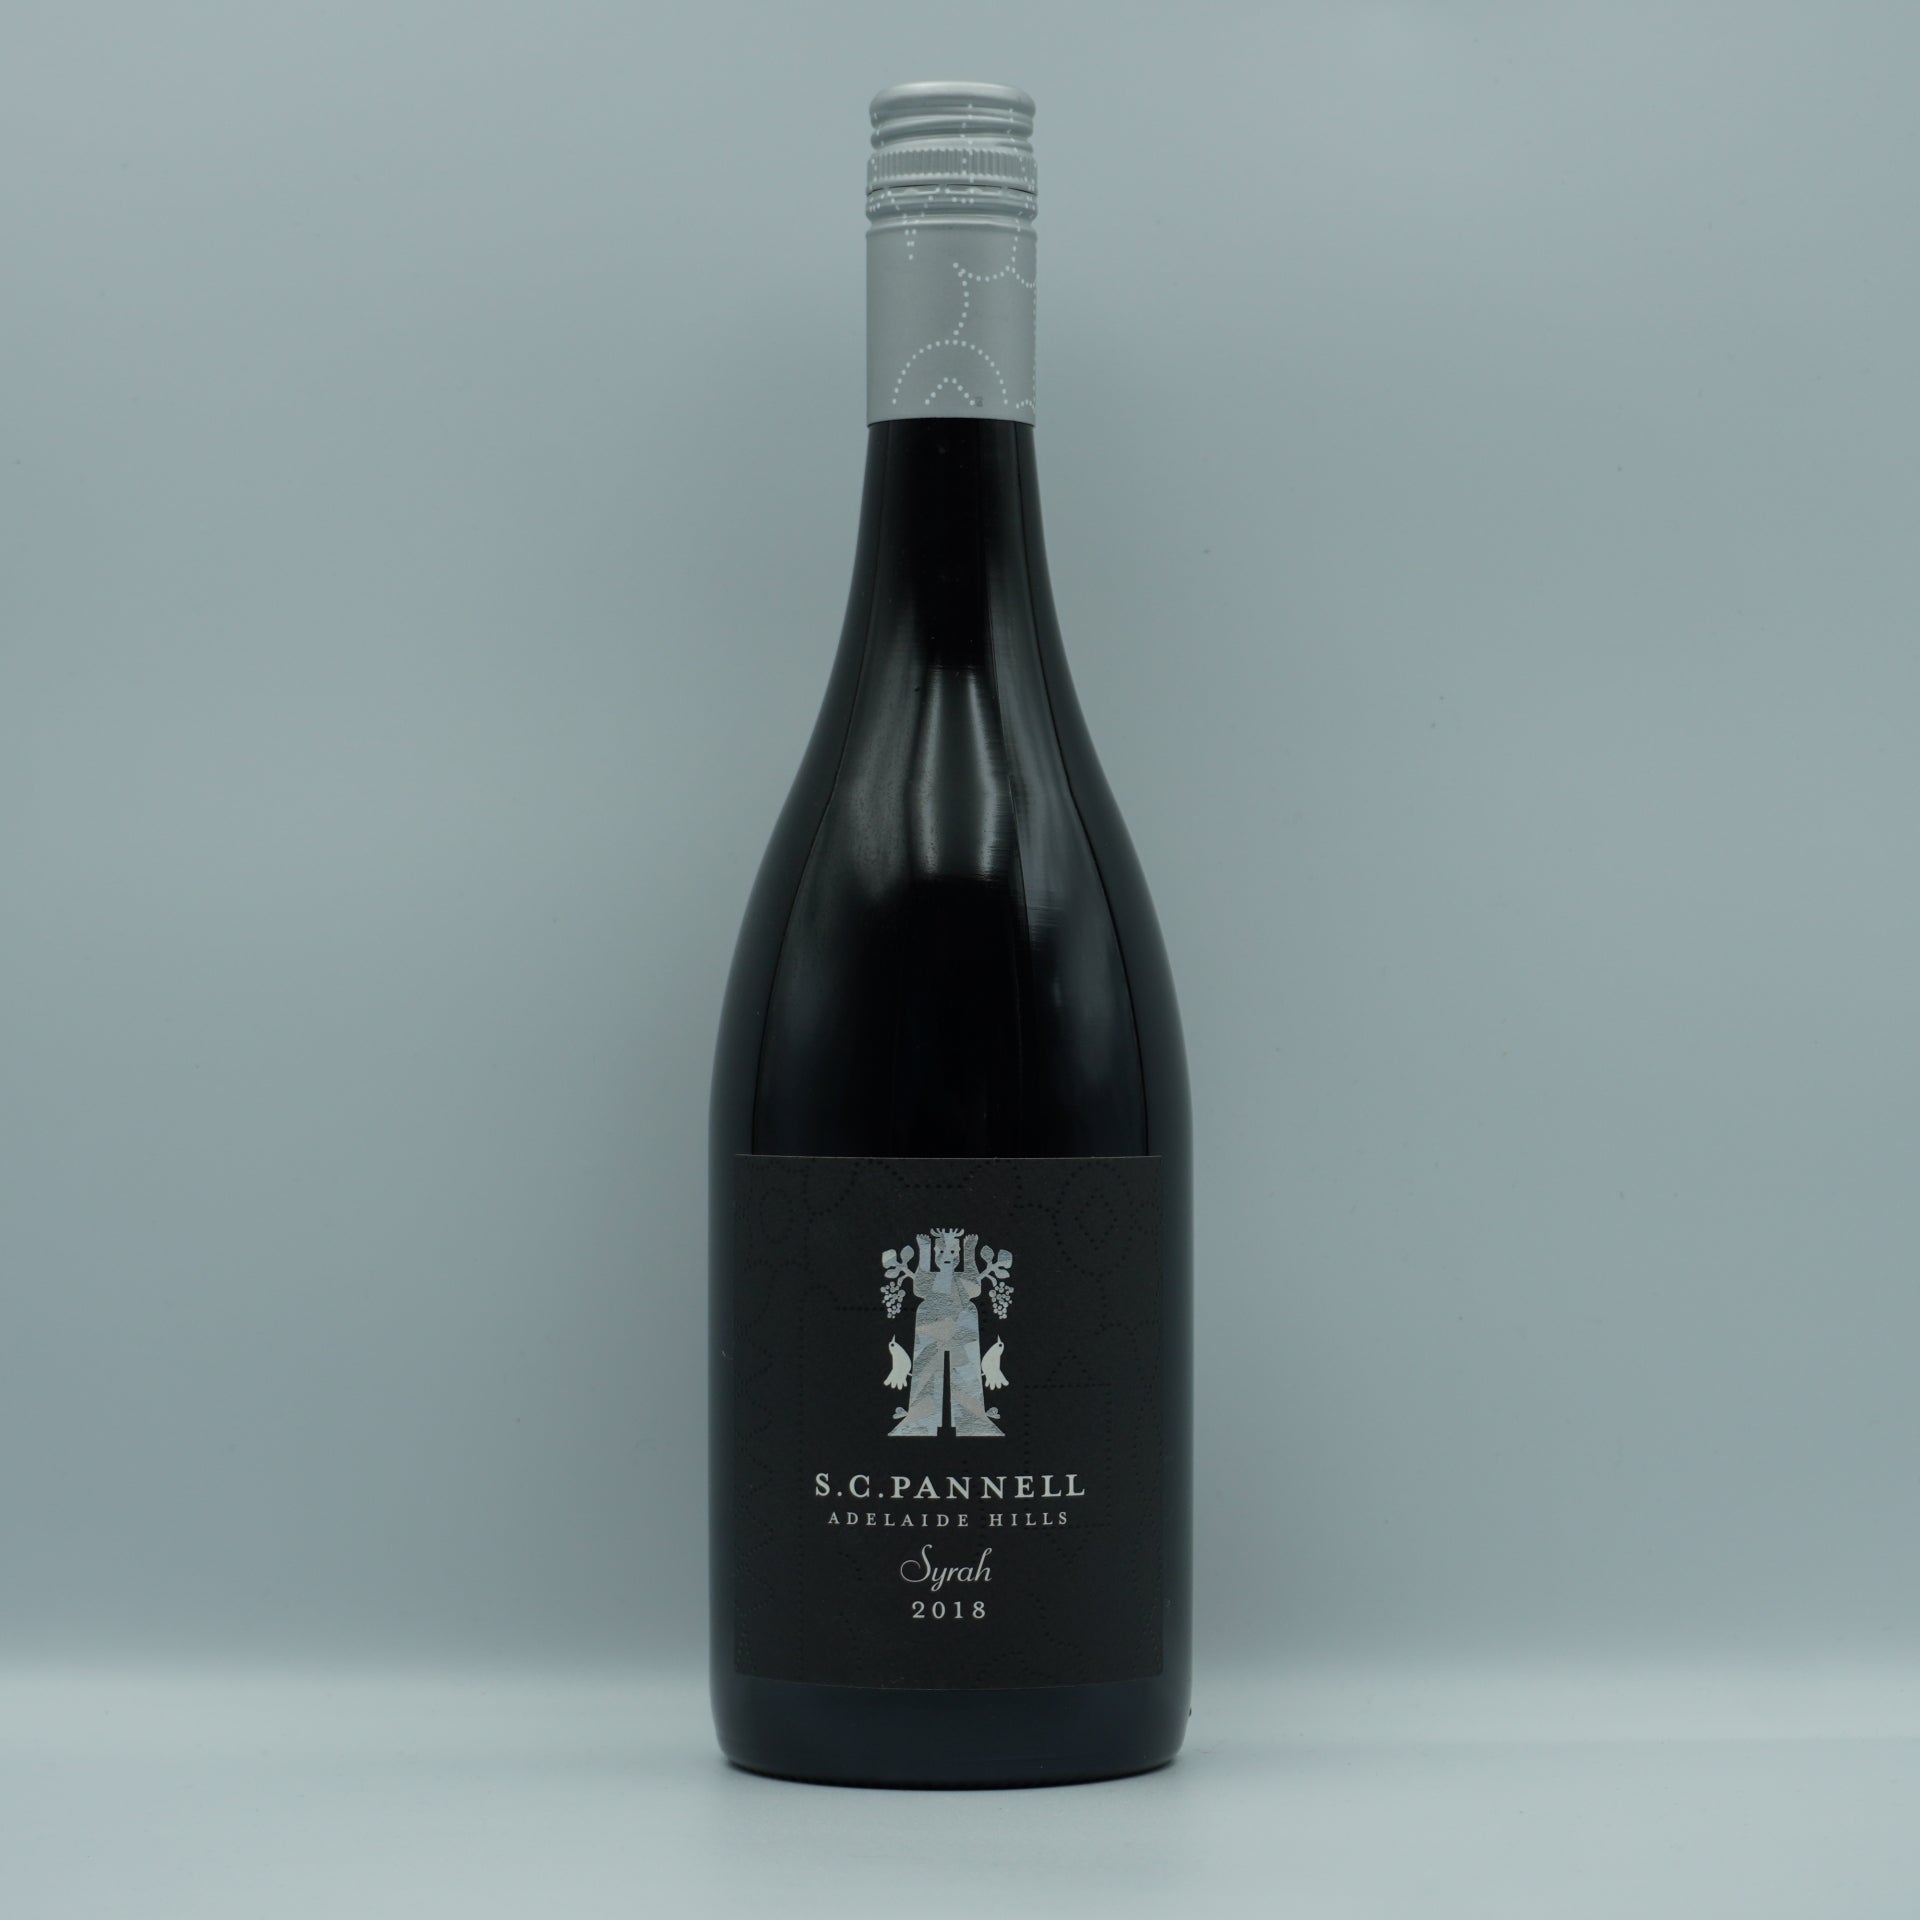 S.C. Pannell Adelaide Hills Syrah 2018